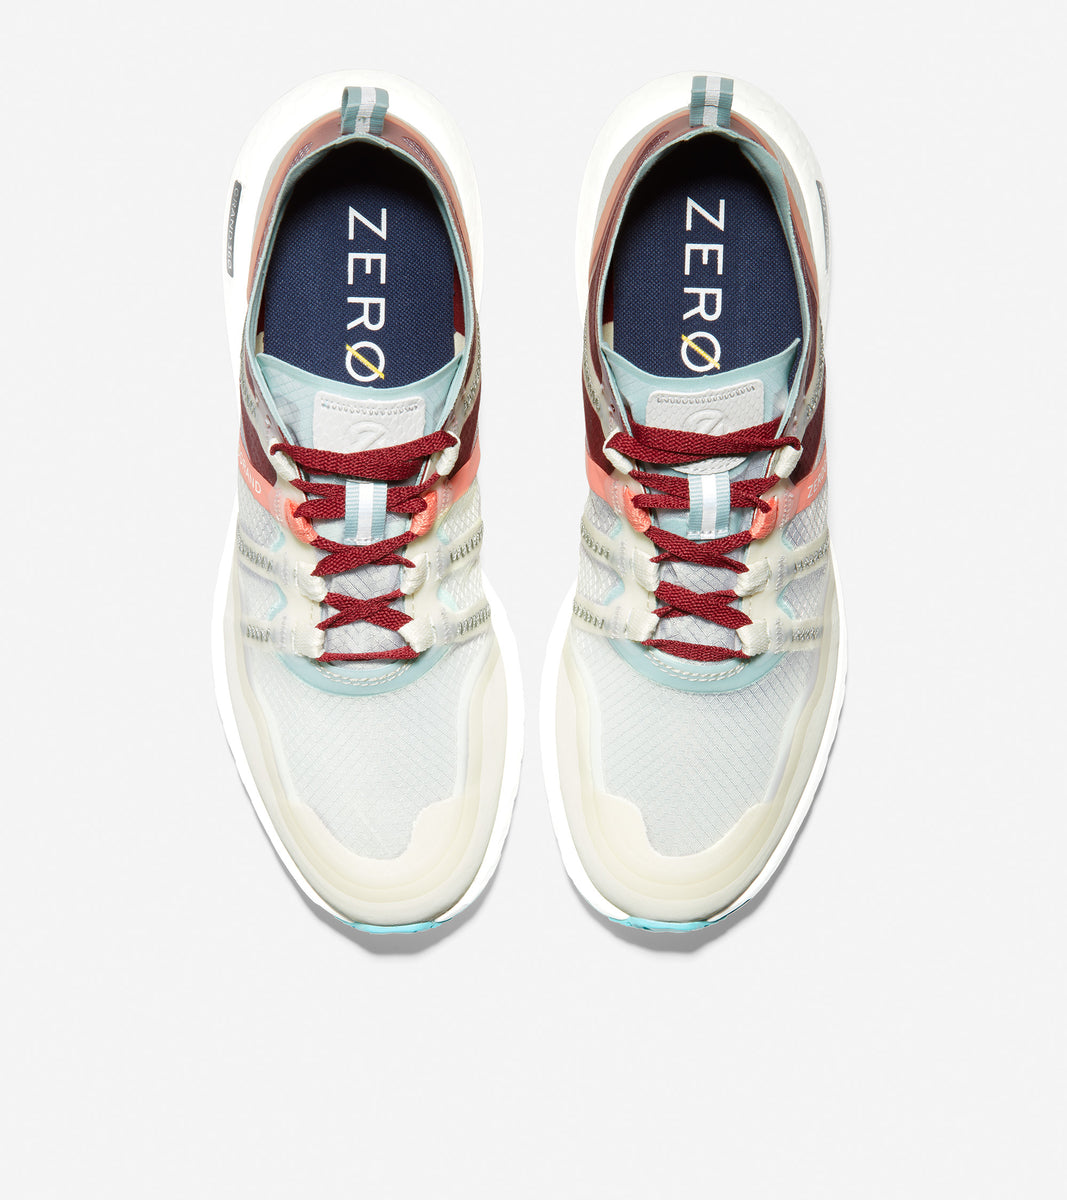 ColeHaan-ZERØGRAND Outpace Running Shoe-w19471-Birch-Burnt Coral-Optic White